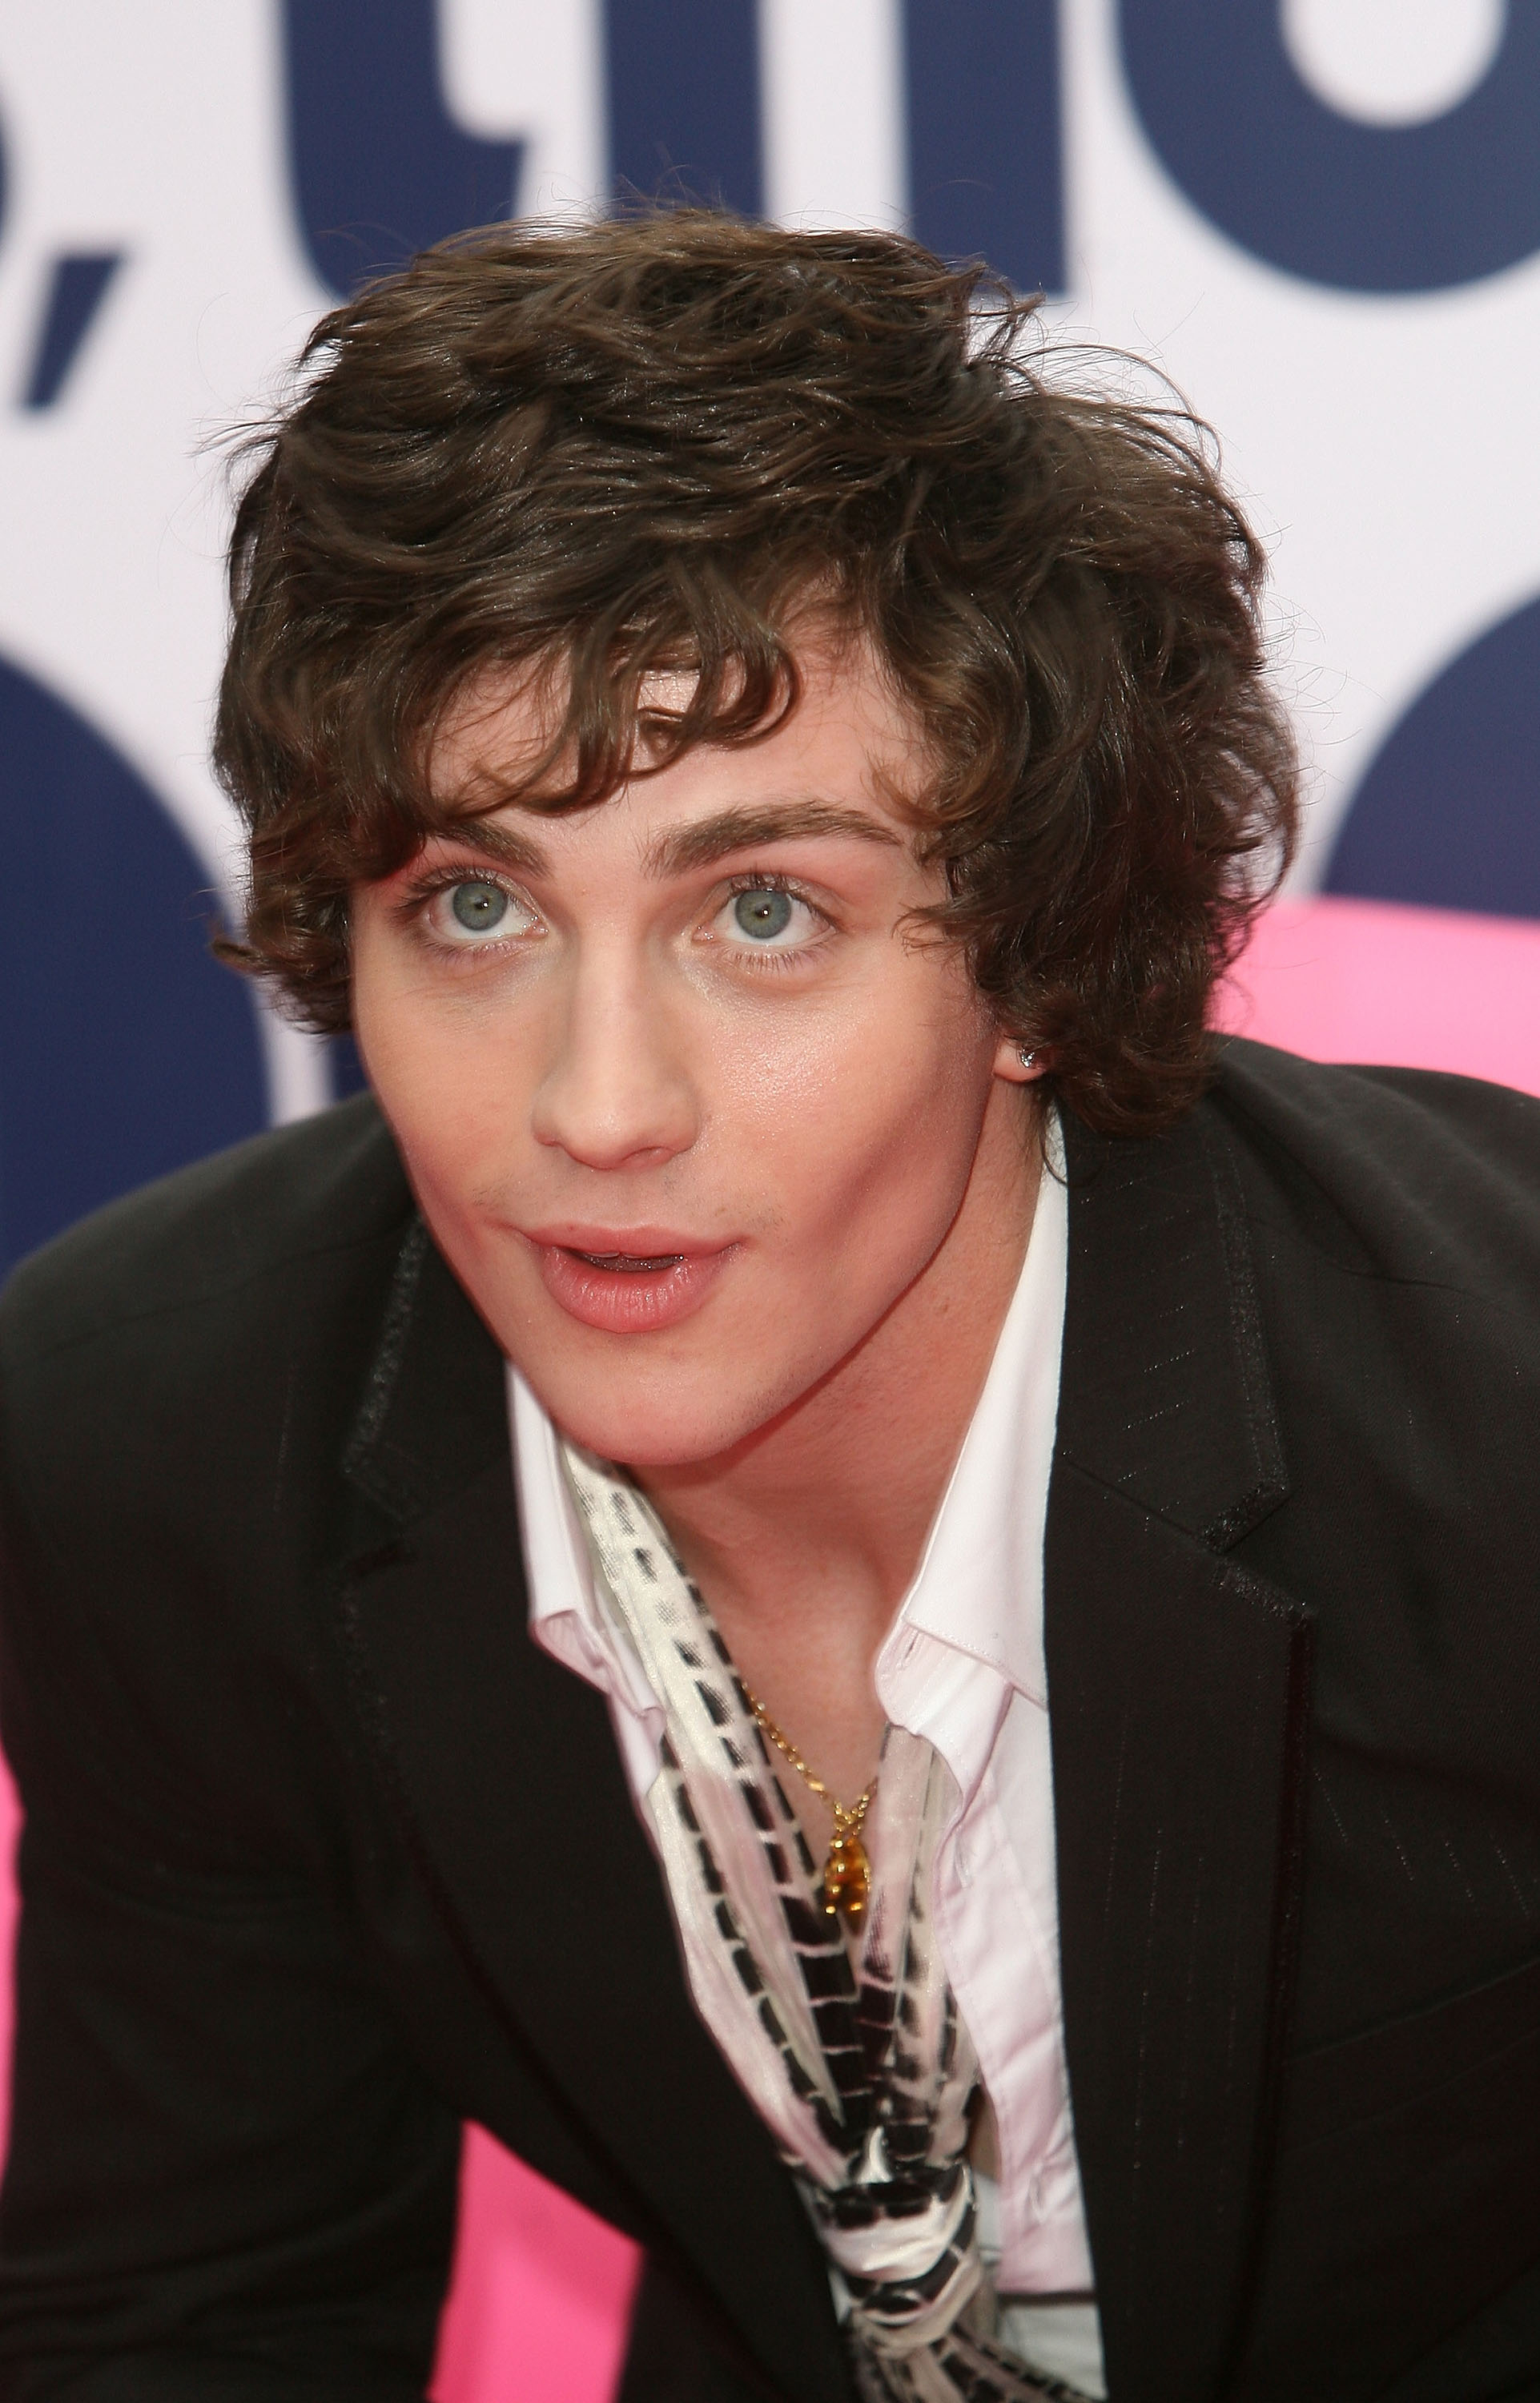 Aaron wearing a black blazer over a striped shirt at an event